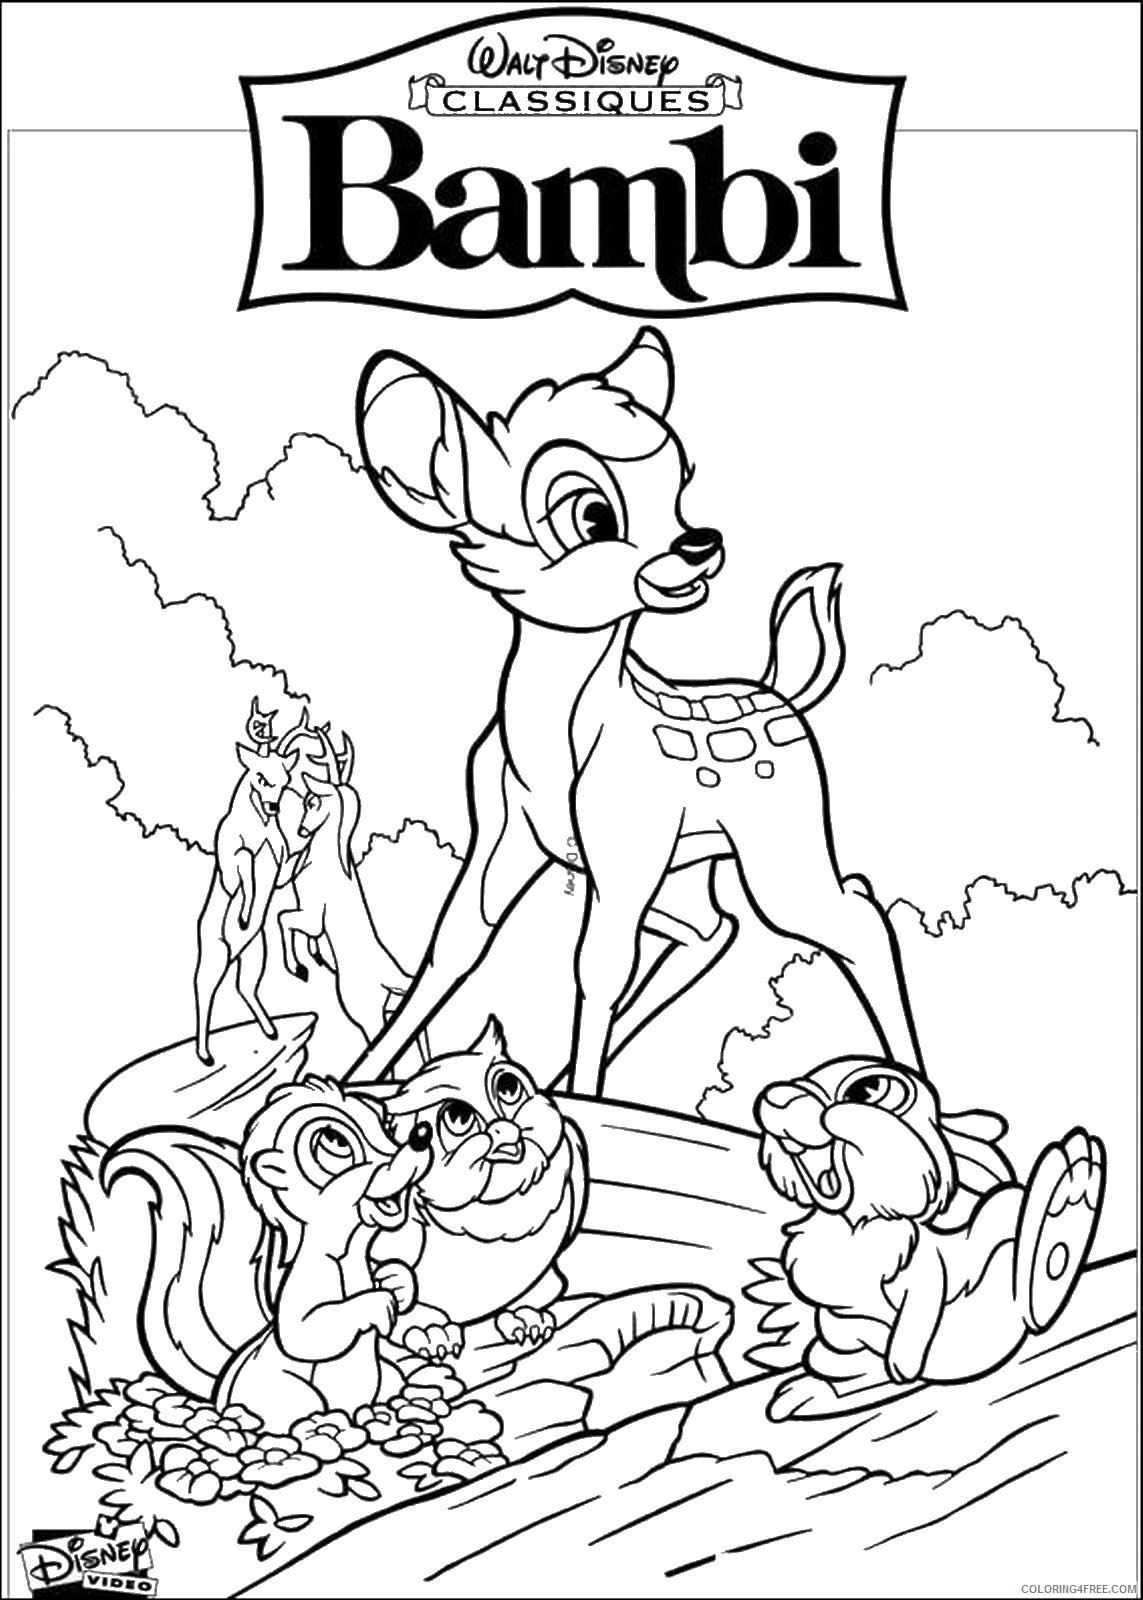 Bambi Coloring Pages Cartoons bambi_cl_06 Printable 2020 0932 Coloring4free